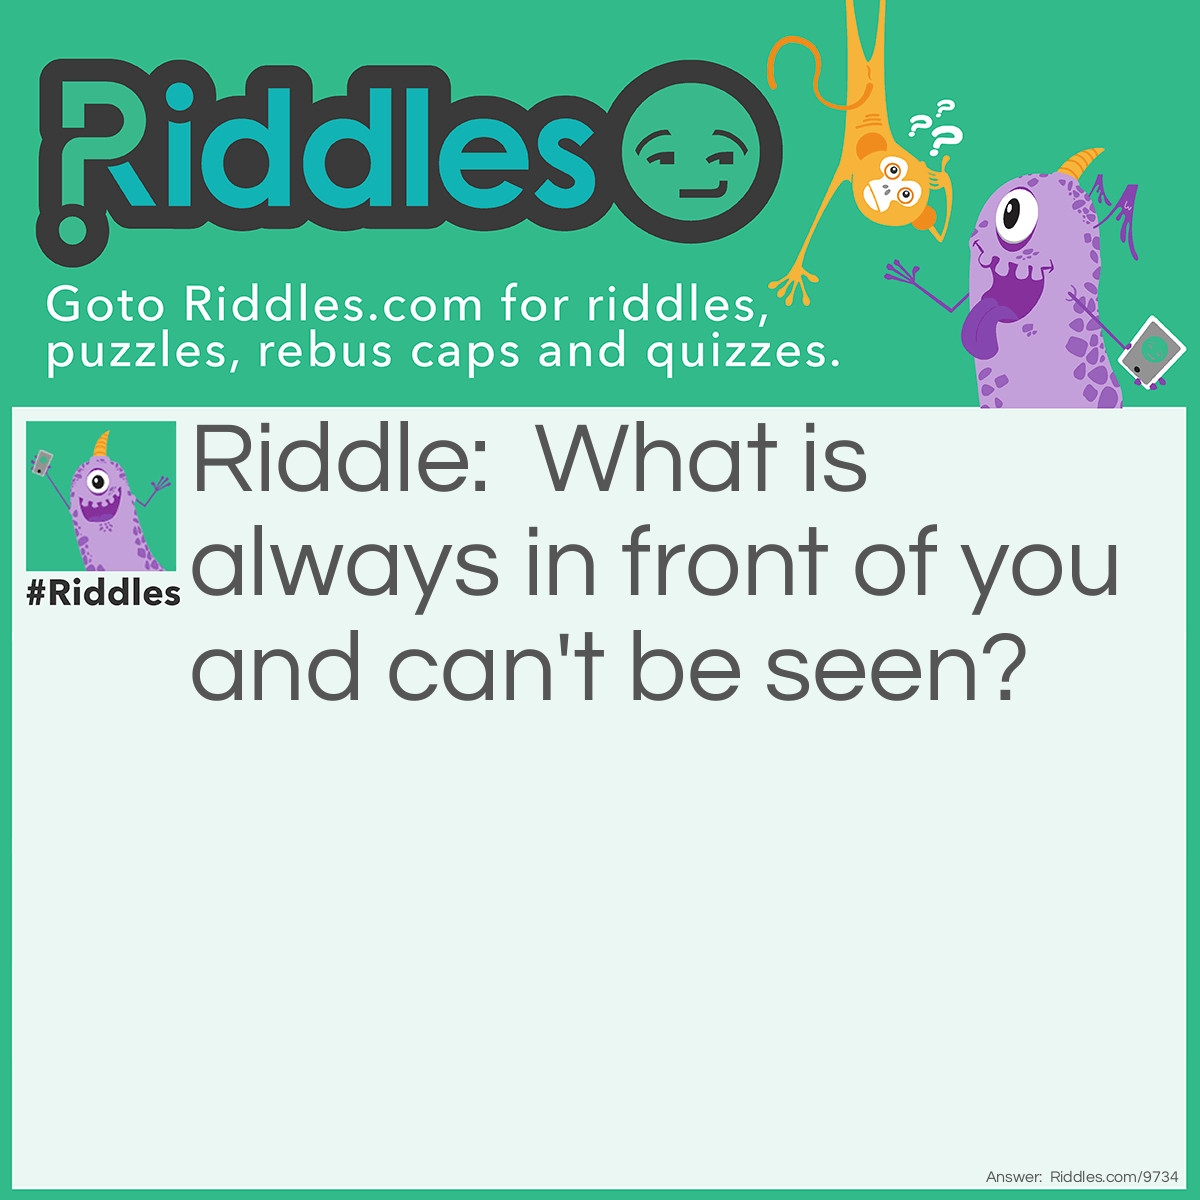 Riddle: What is always in front of you and can't be seen? Answer: A drop of water